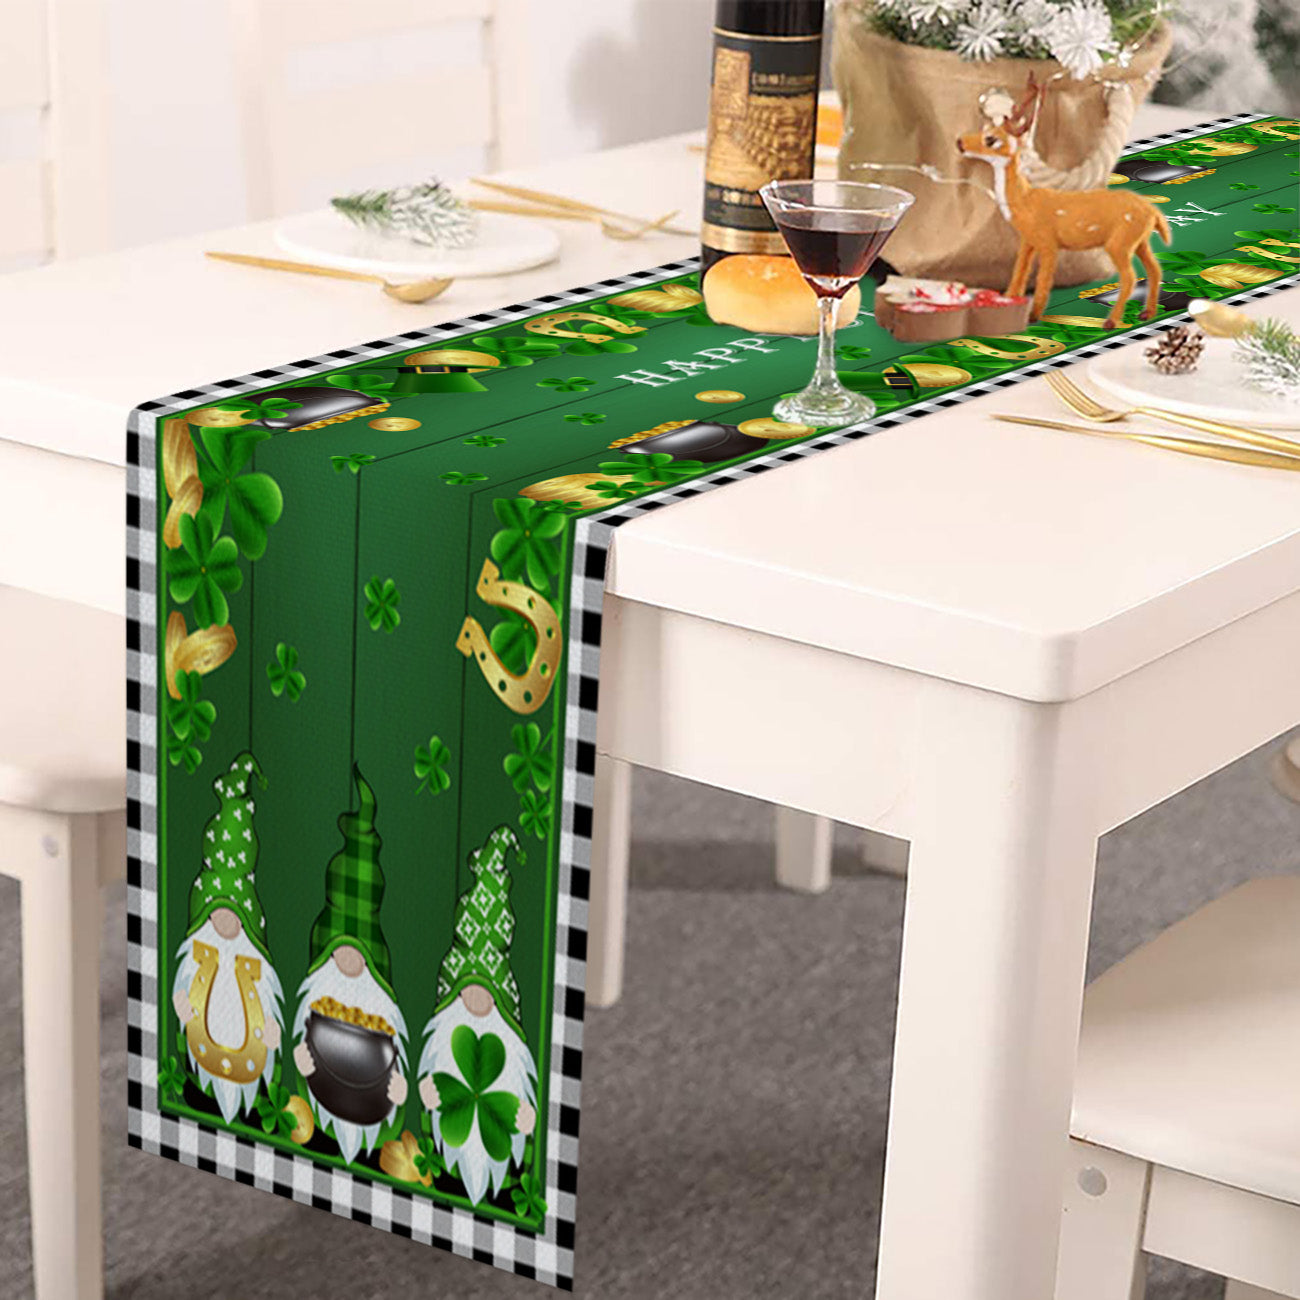 3 Lucky Gnomes - St. Patrick's Day Green Table Runner